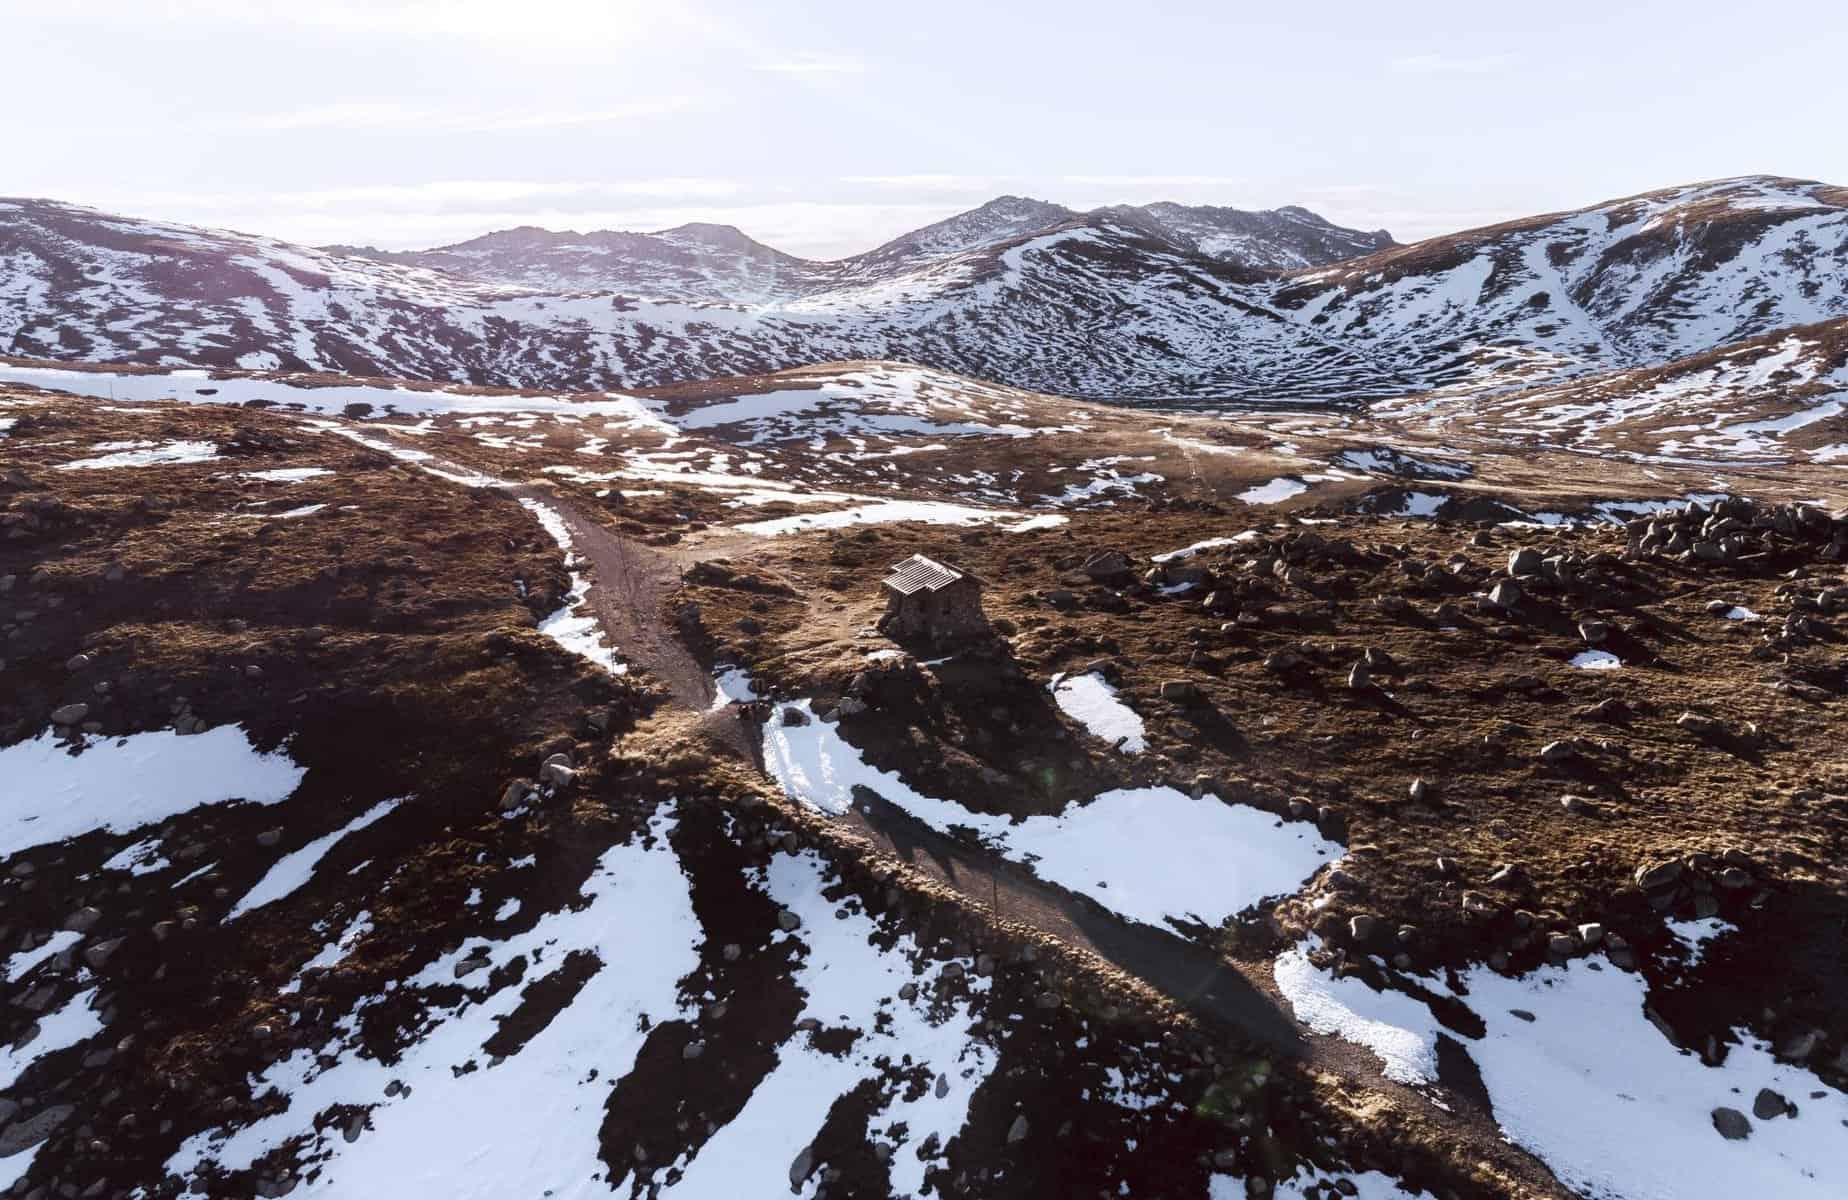 Scenic aerial overlooking the alpine backcountry in Kosciuszko National Park.